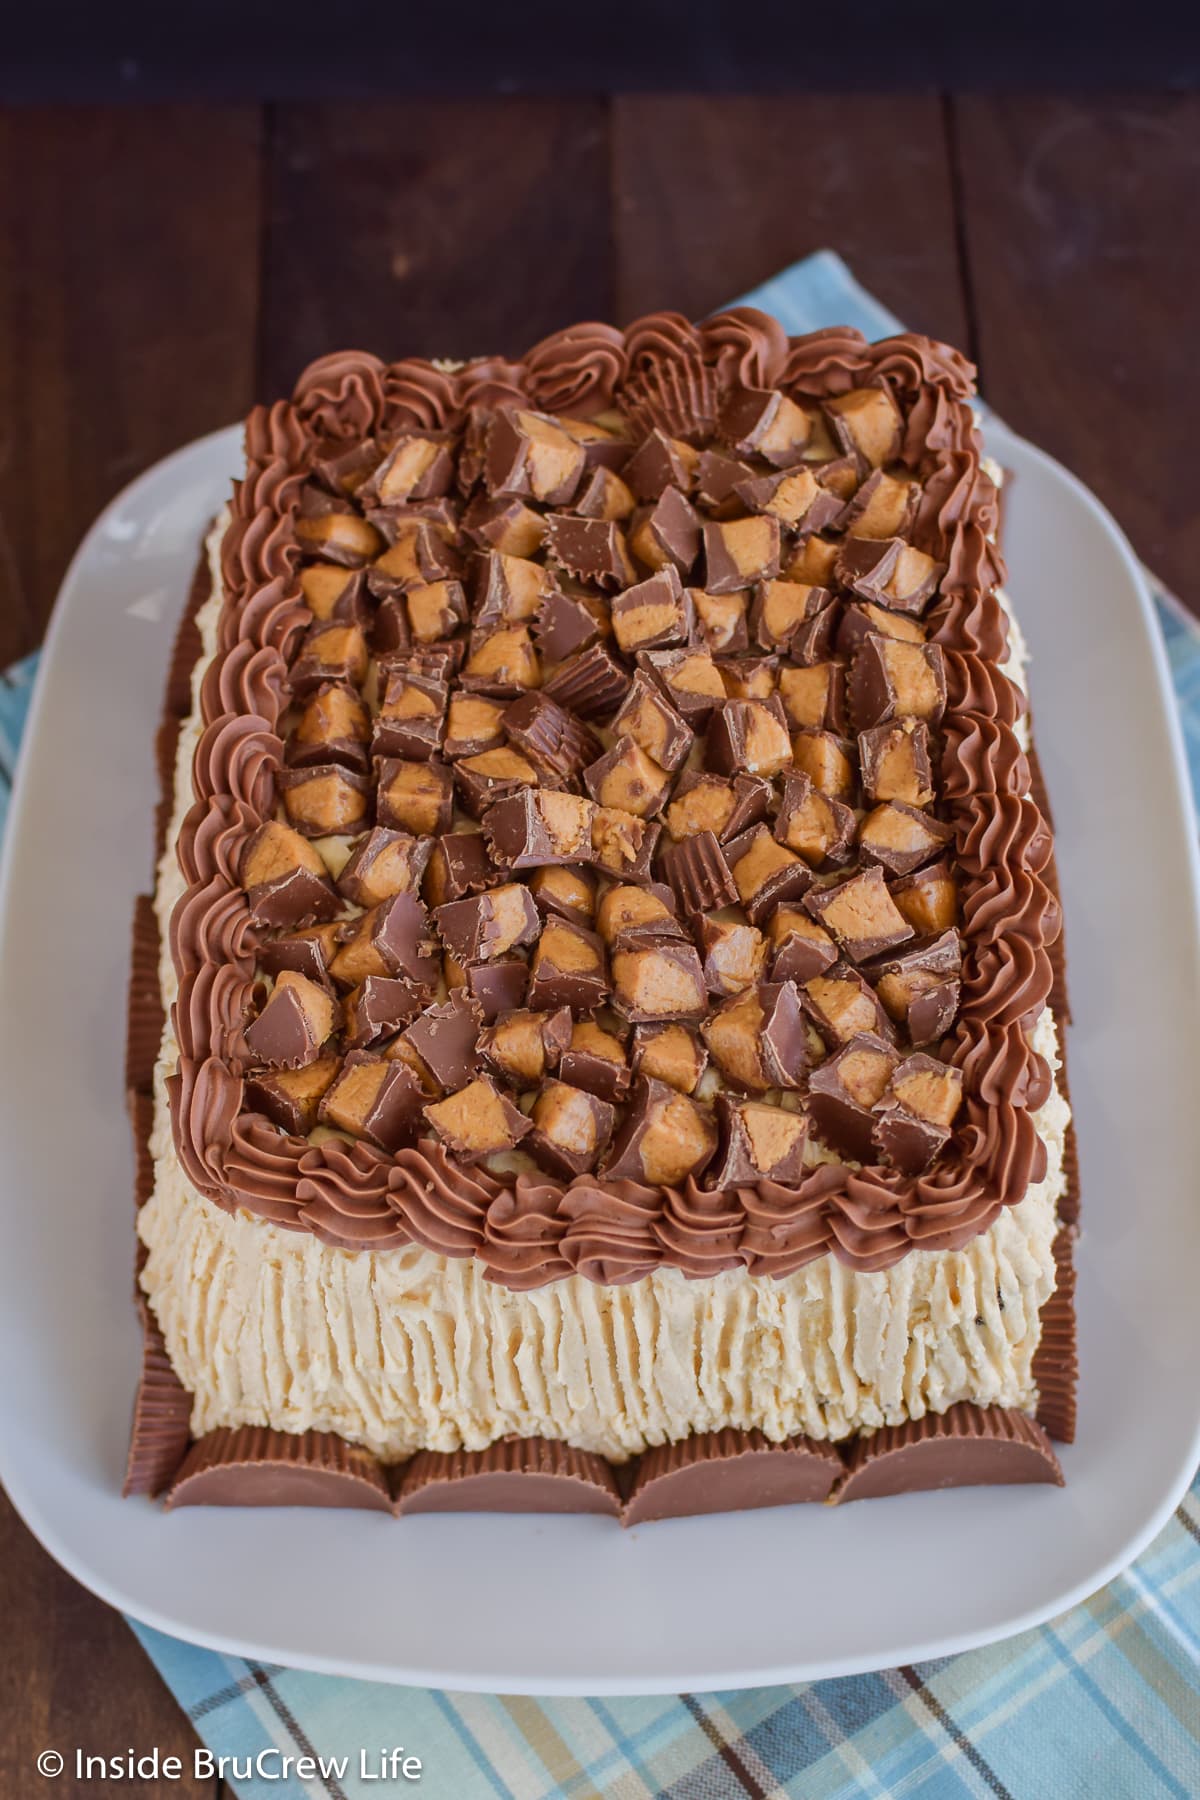 A frosted cake on a plate with chopped peanut butter candies on top.